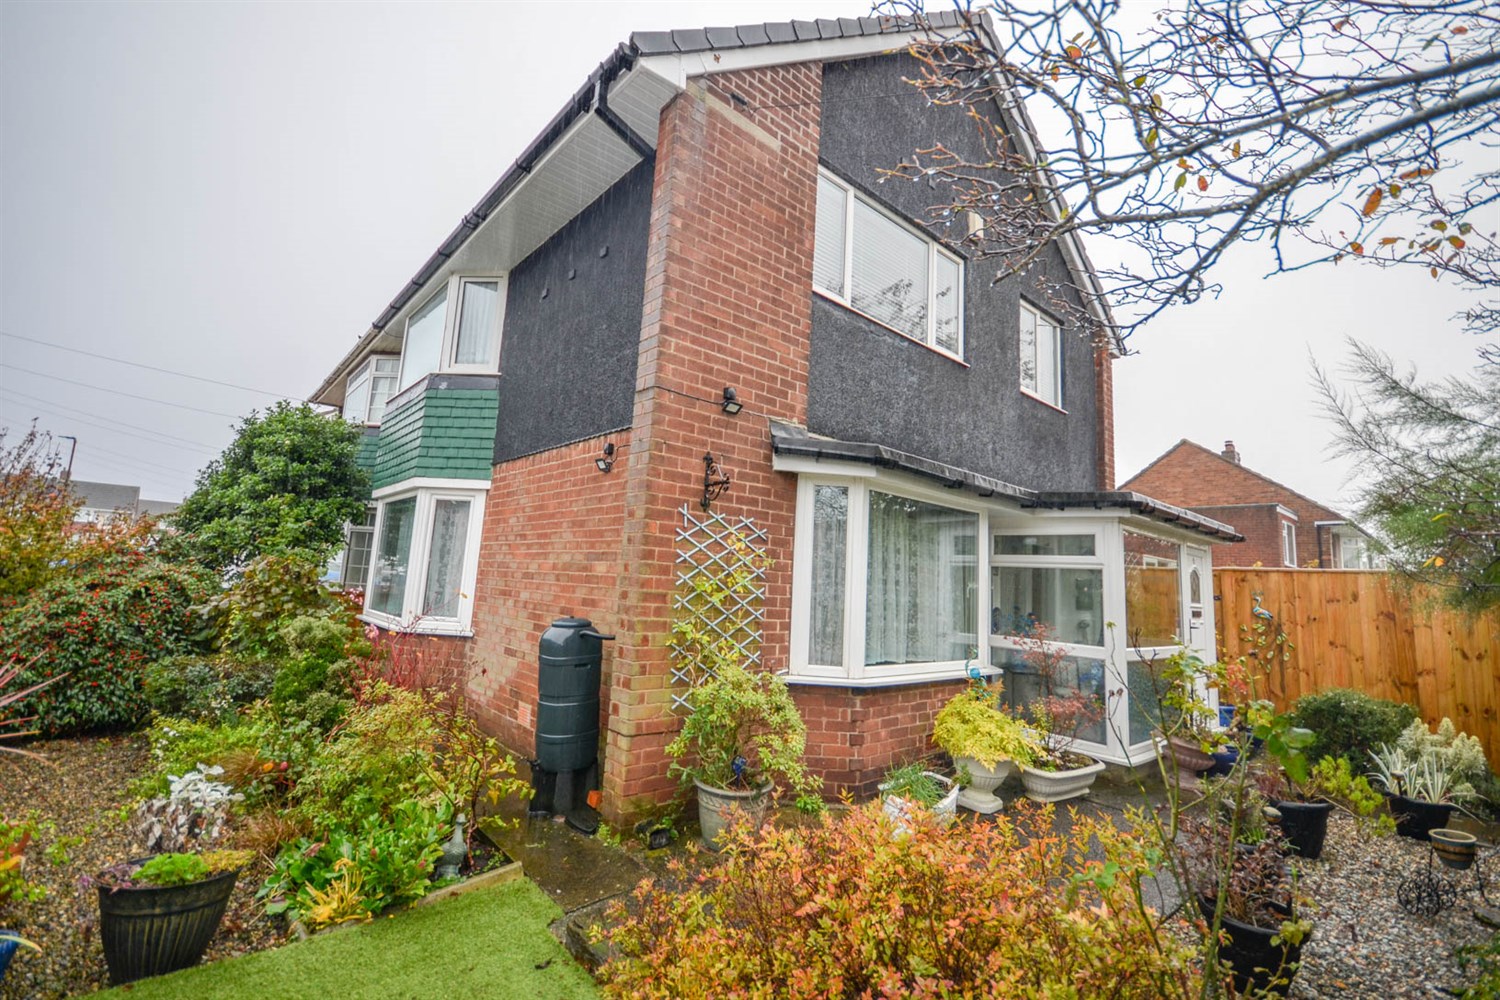 3 bed semi-detached house for sale in Embleton Crescent, North Shields - Property Image 1